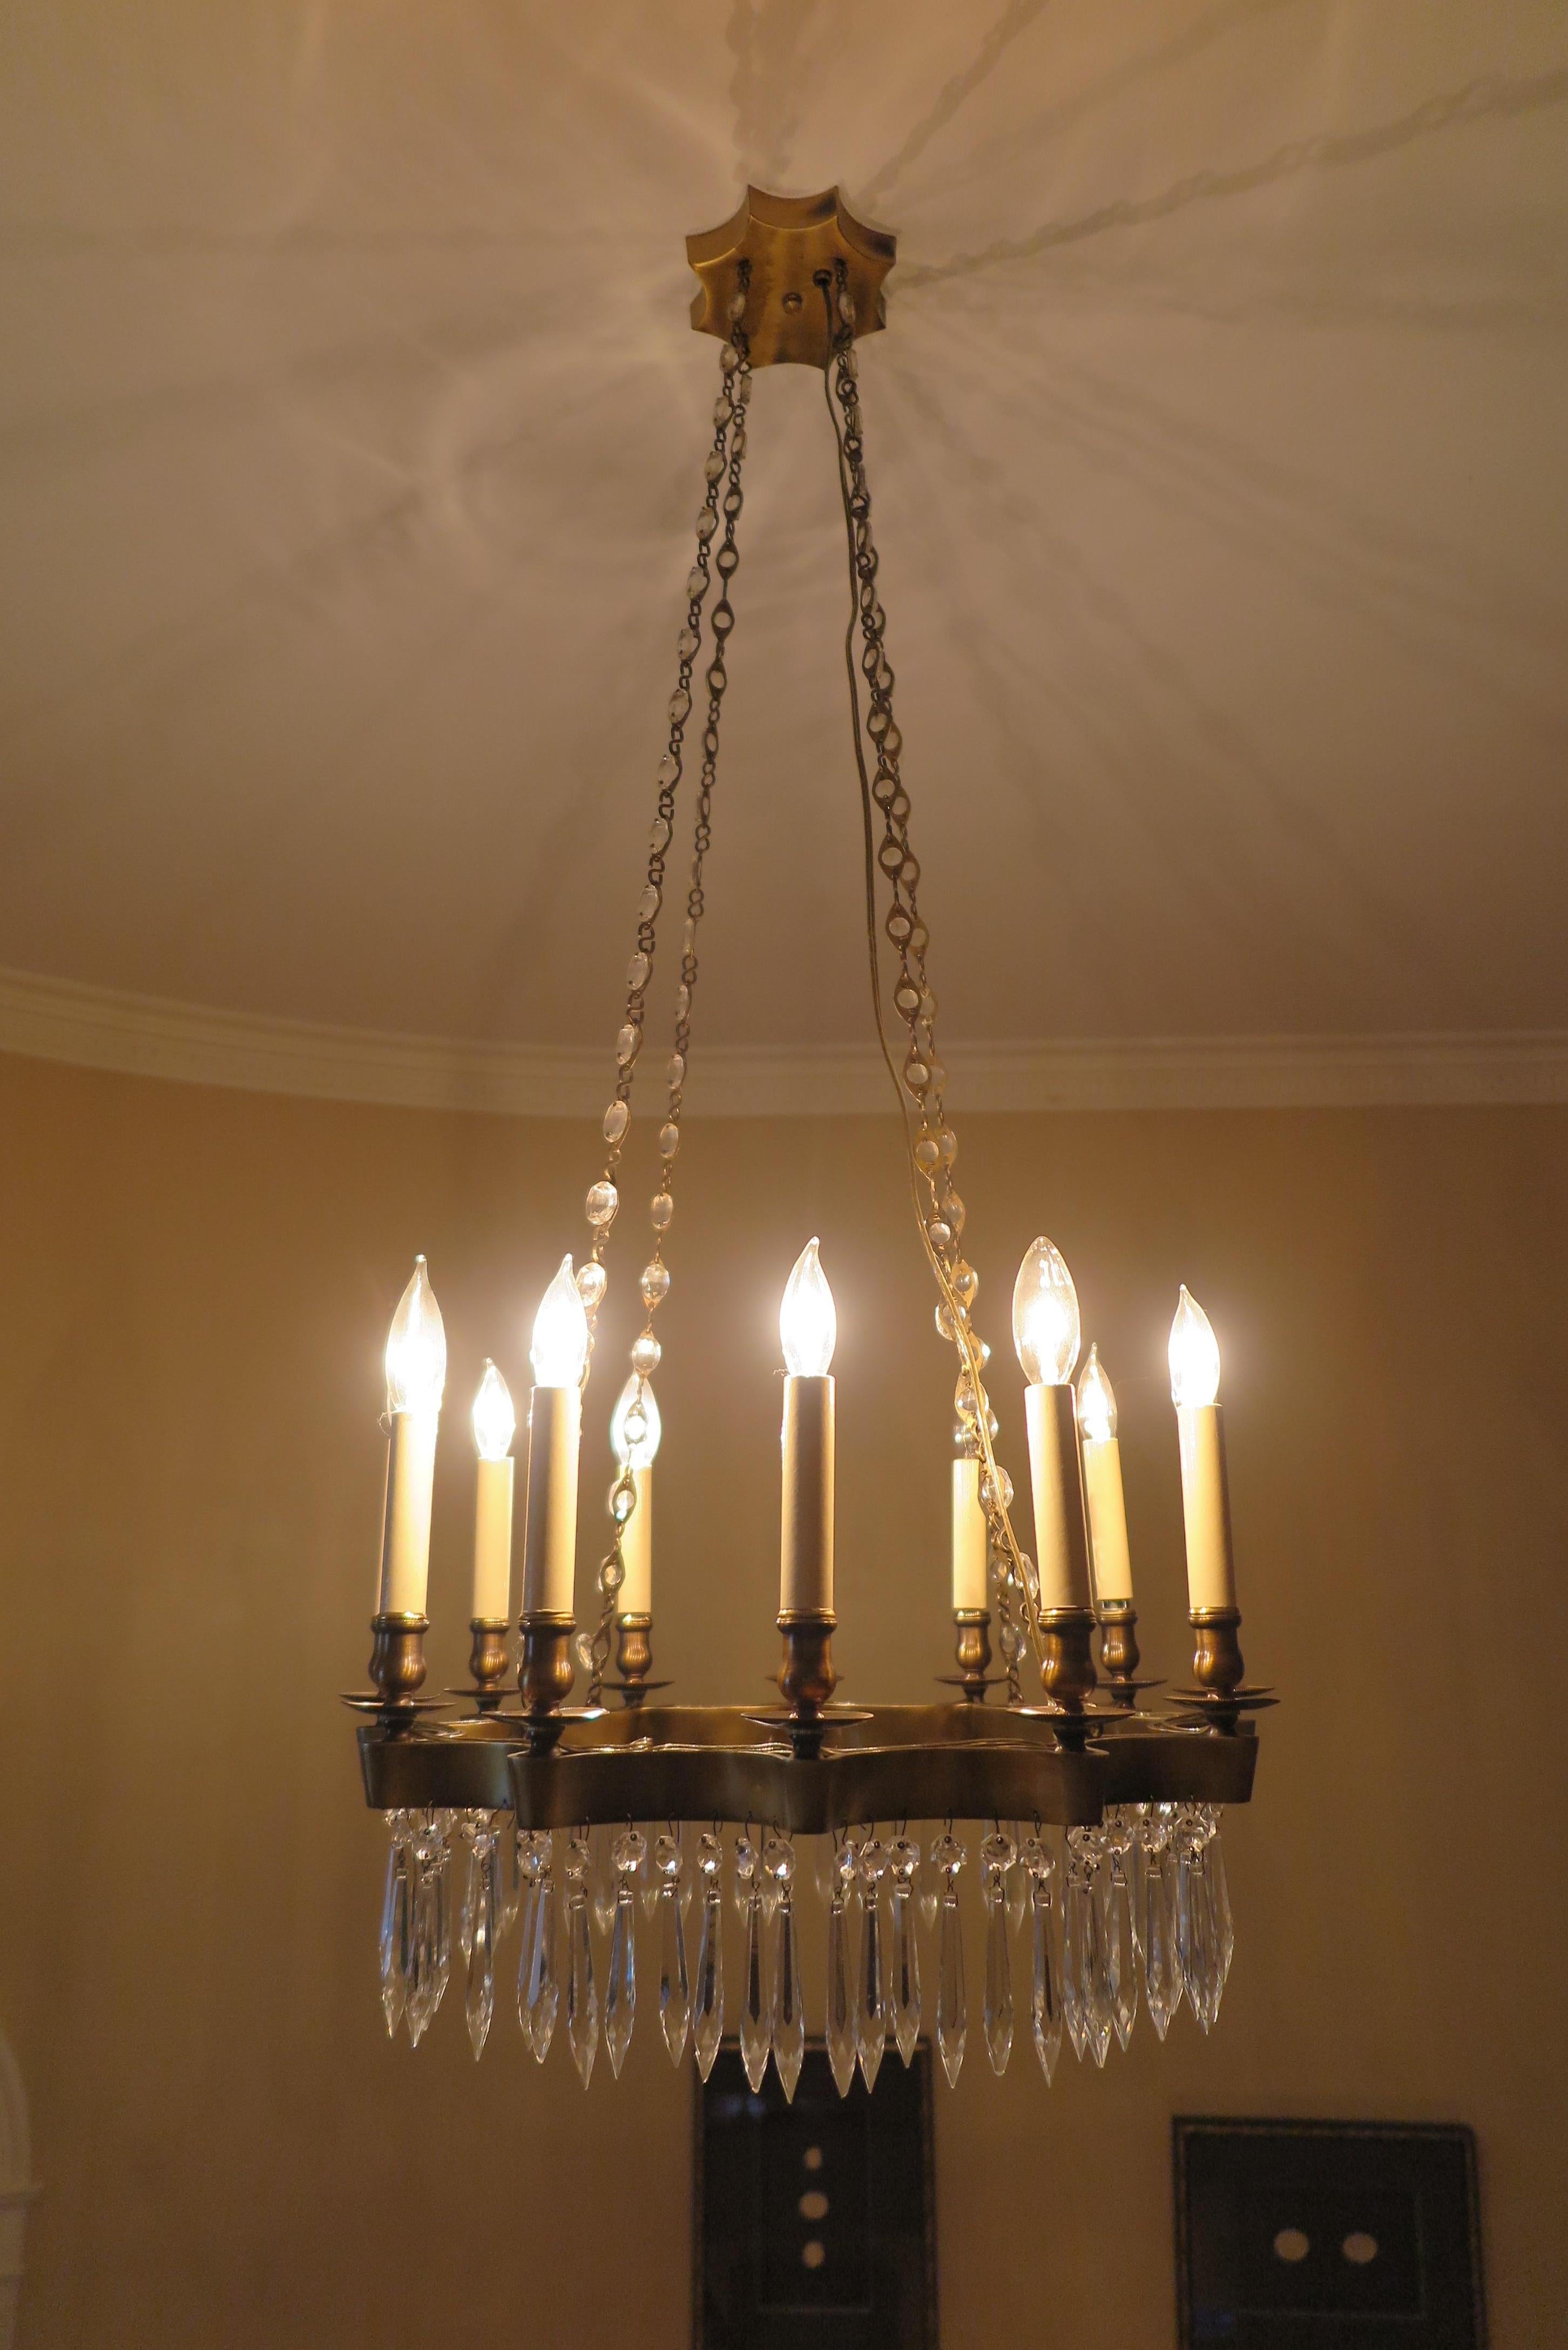 Brass bronze star burst and crystal chandelier. Early midcentury 1940-1950 possibly earlier. Brass bronze star shape frame and canopy with hanging crystals having 12 lights. 
Illuminates beautifully. Very good condition.